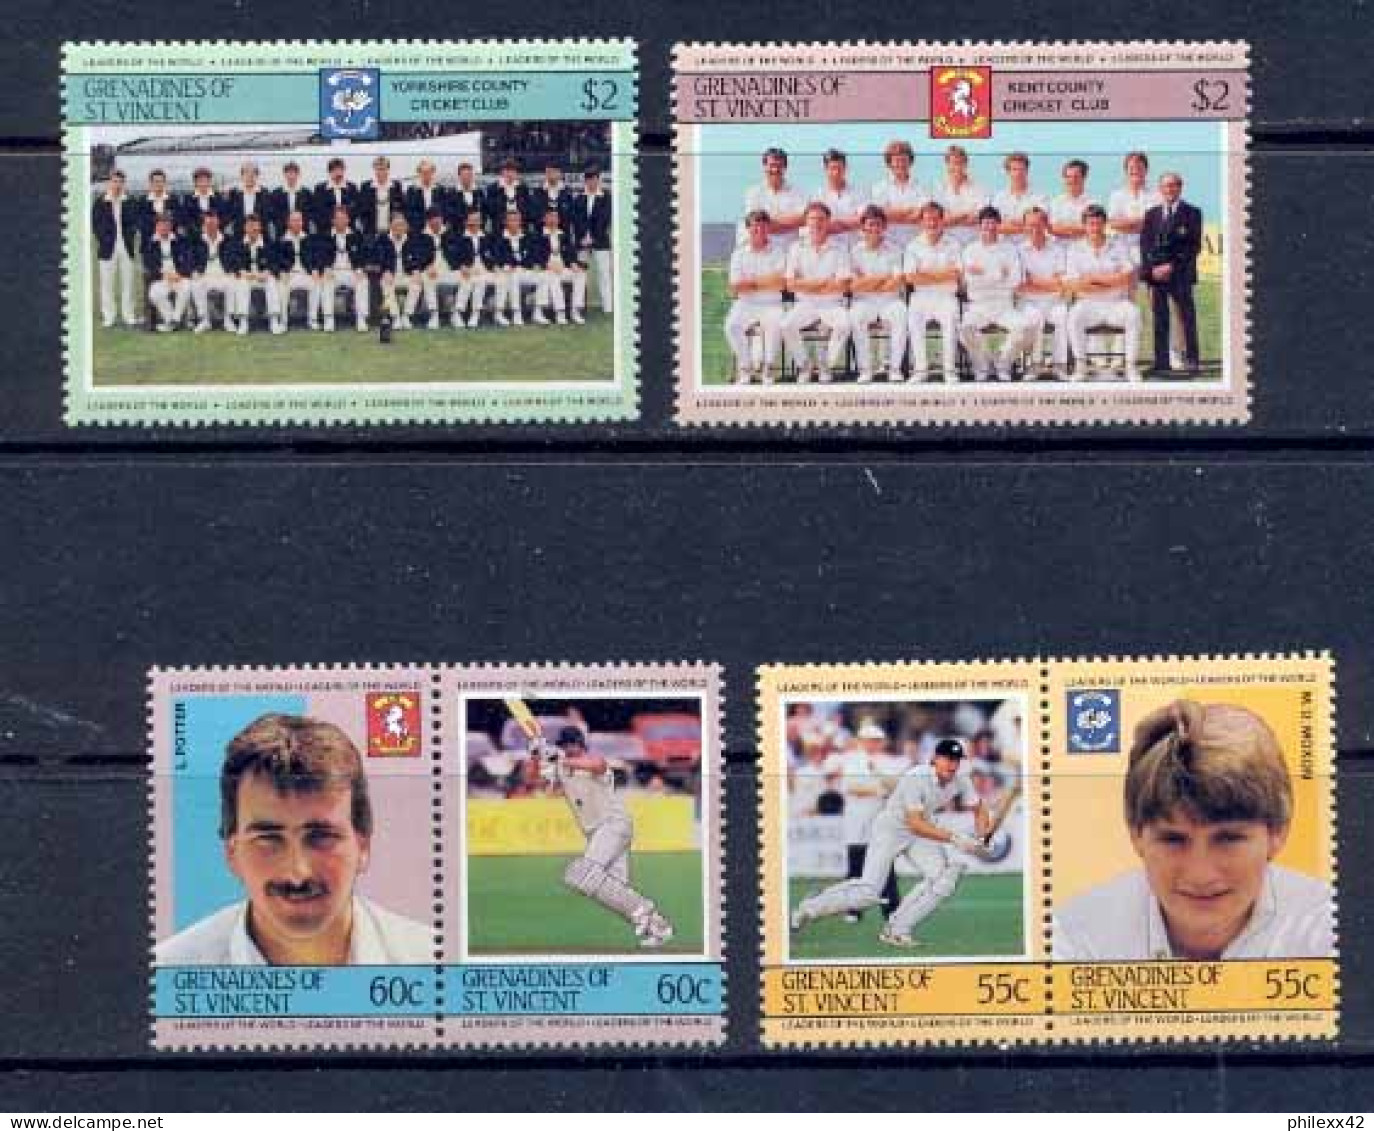 Bequia Grenadines Of St. Vincent 286 Série Sport Cricket Famous Players MNH ** - Cricket